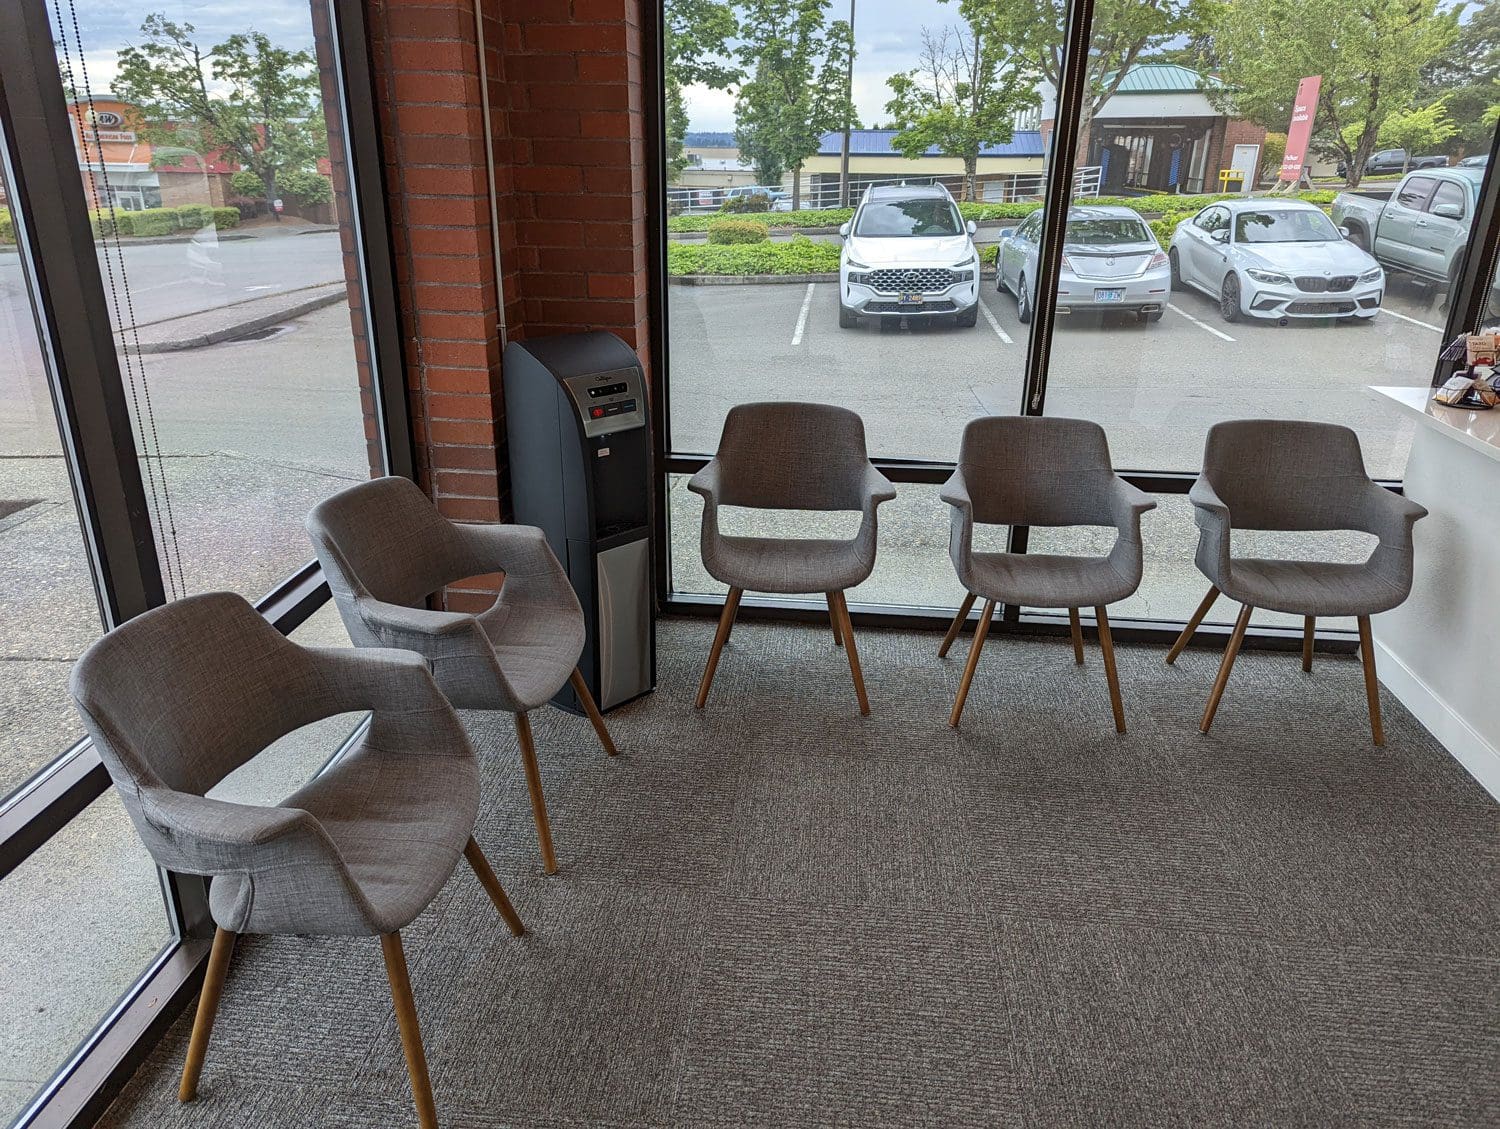 Clackamas Chiropractic Clinic reception area with large windows.